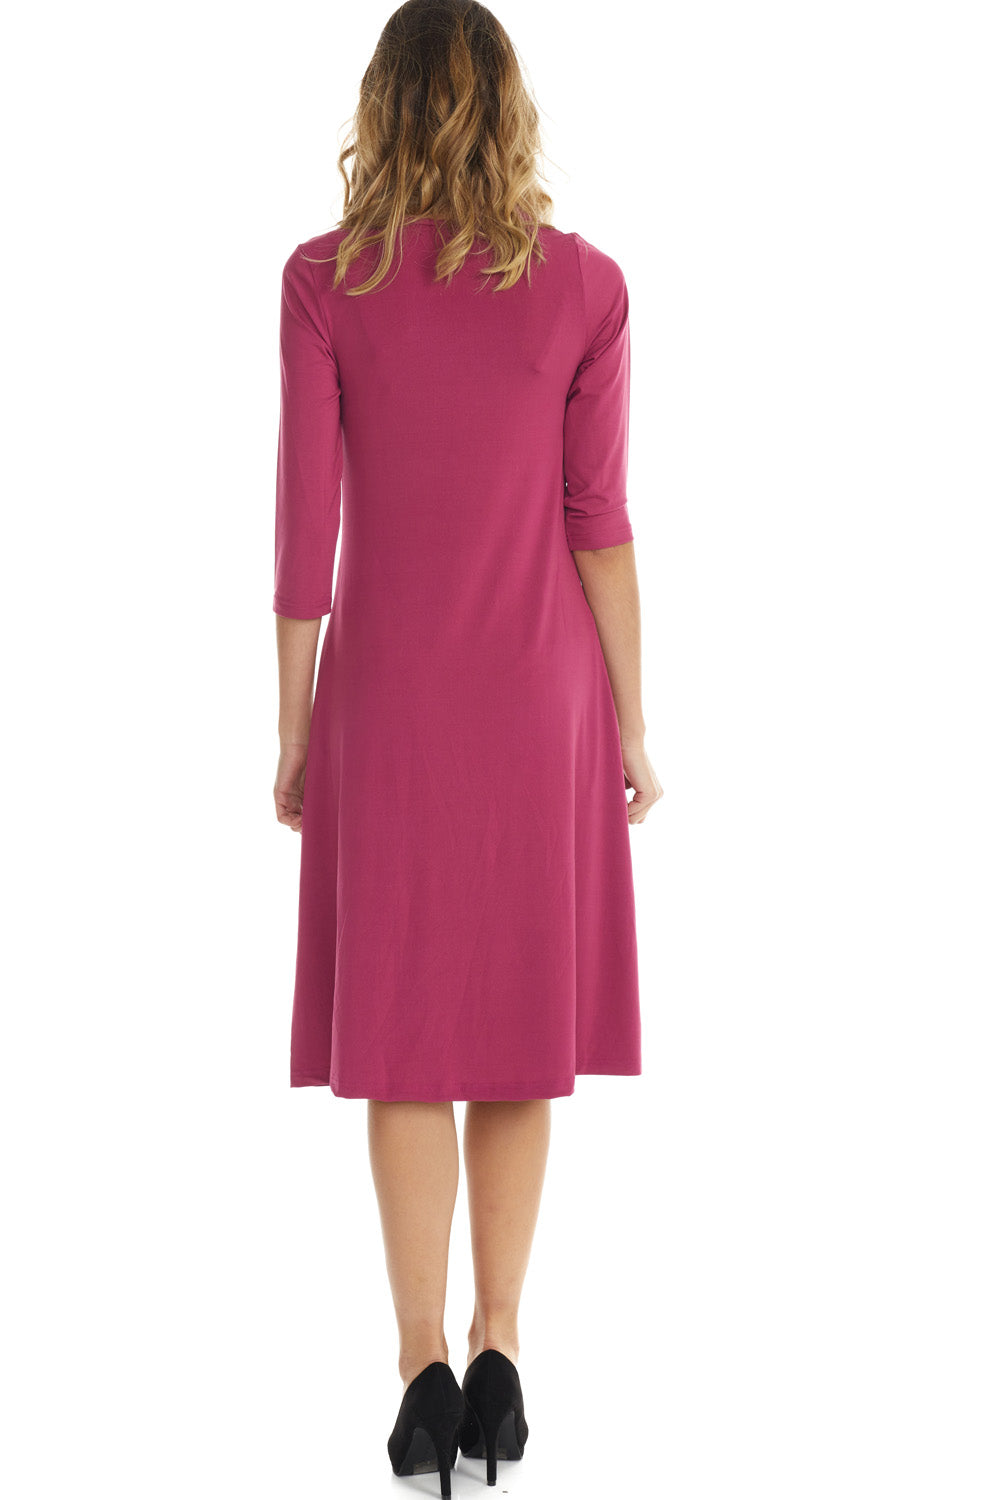 pink flary below knee length 3/4 sleeve crew neck modest tznius a-line plus size dress with pockets